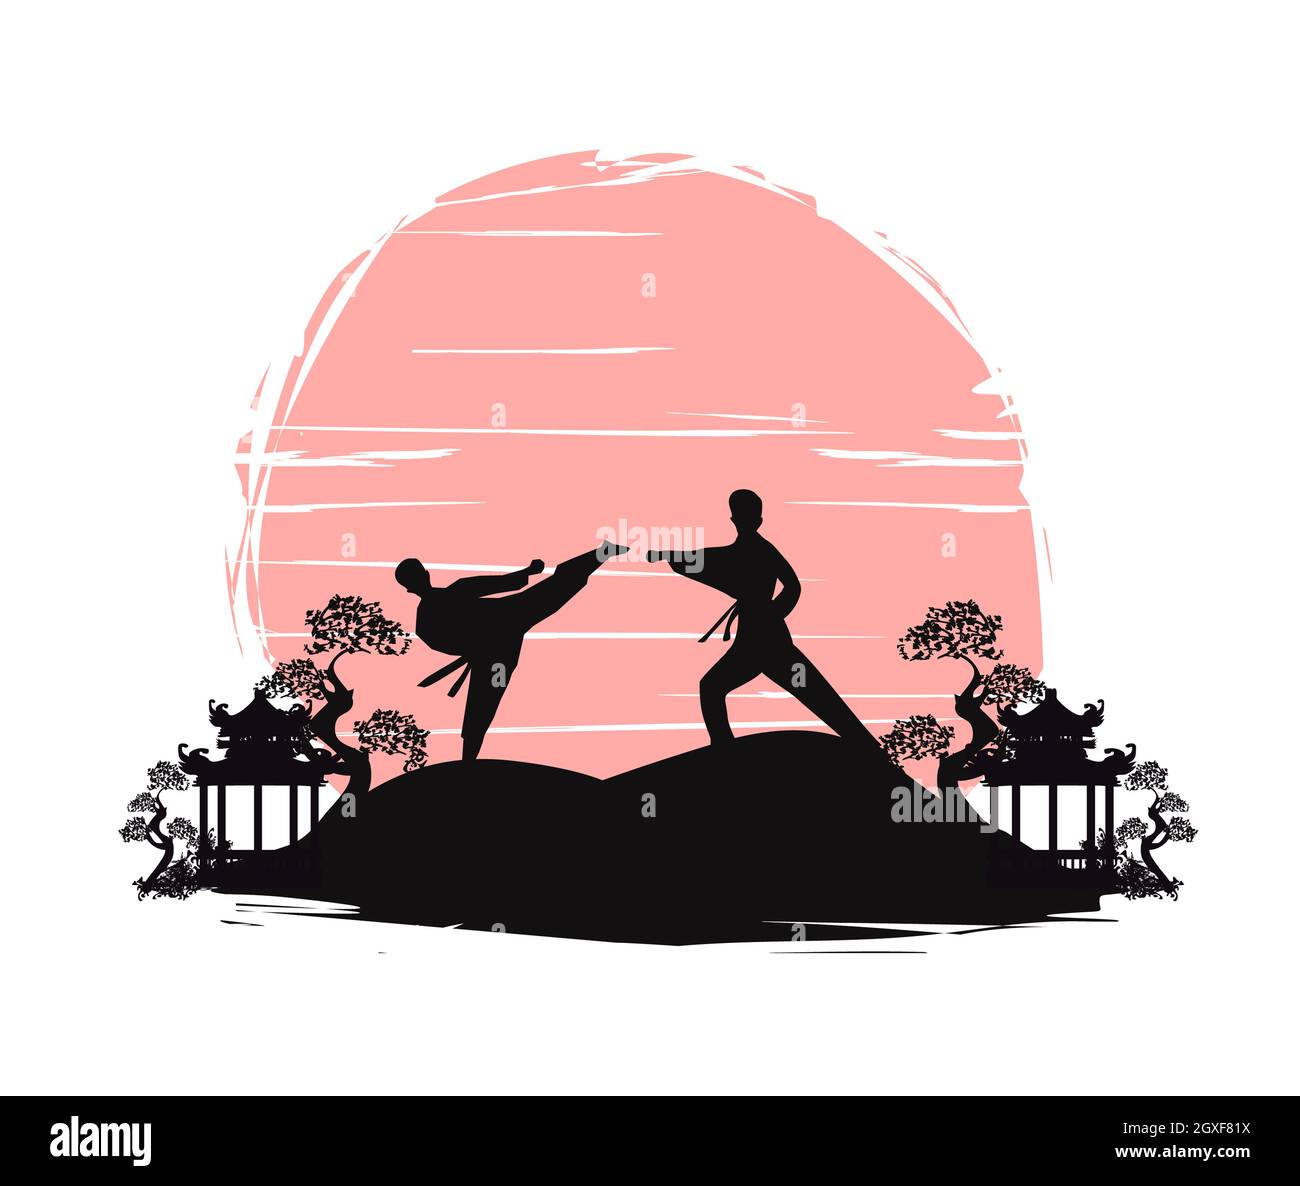 Active tae kwon do martial arts fighters combat fighting and kicking sport silhouettes illustration Stock Photo